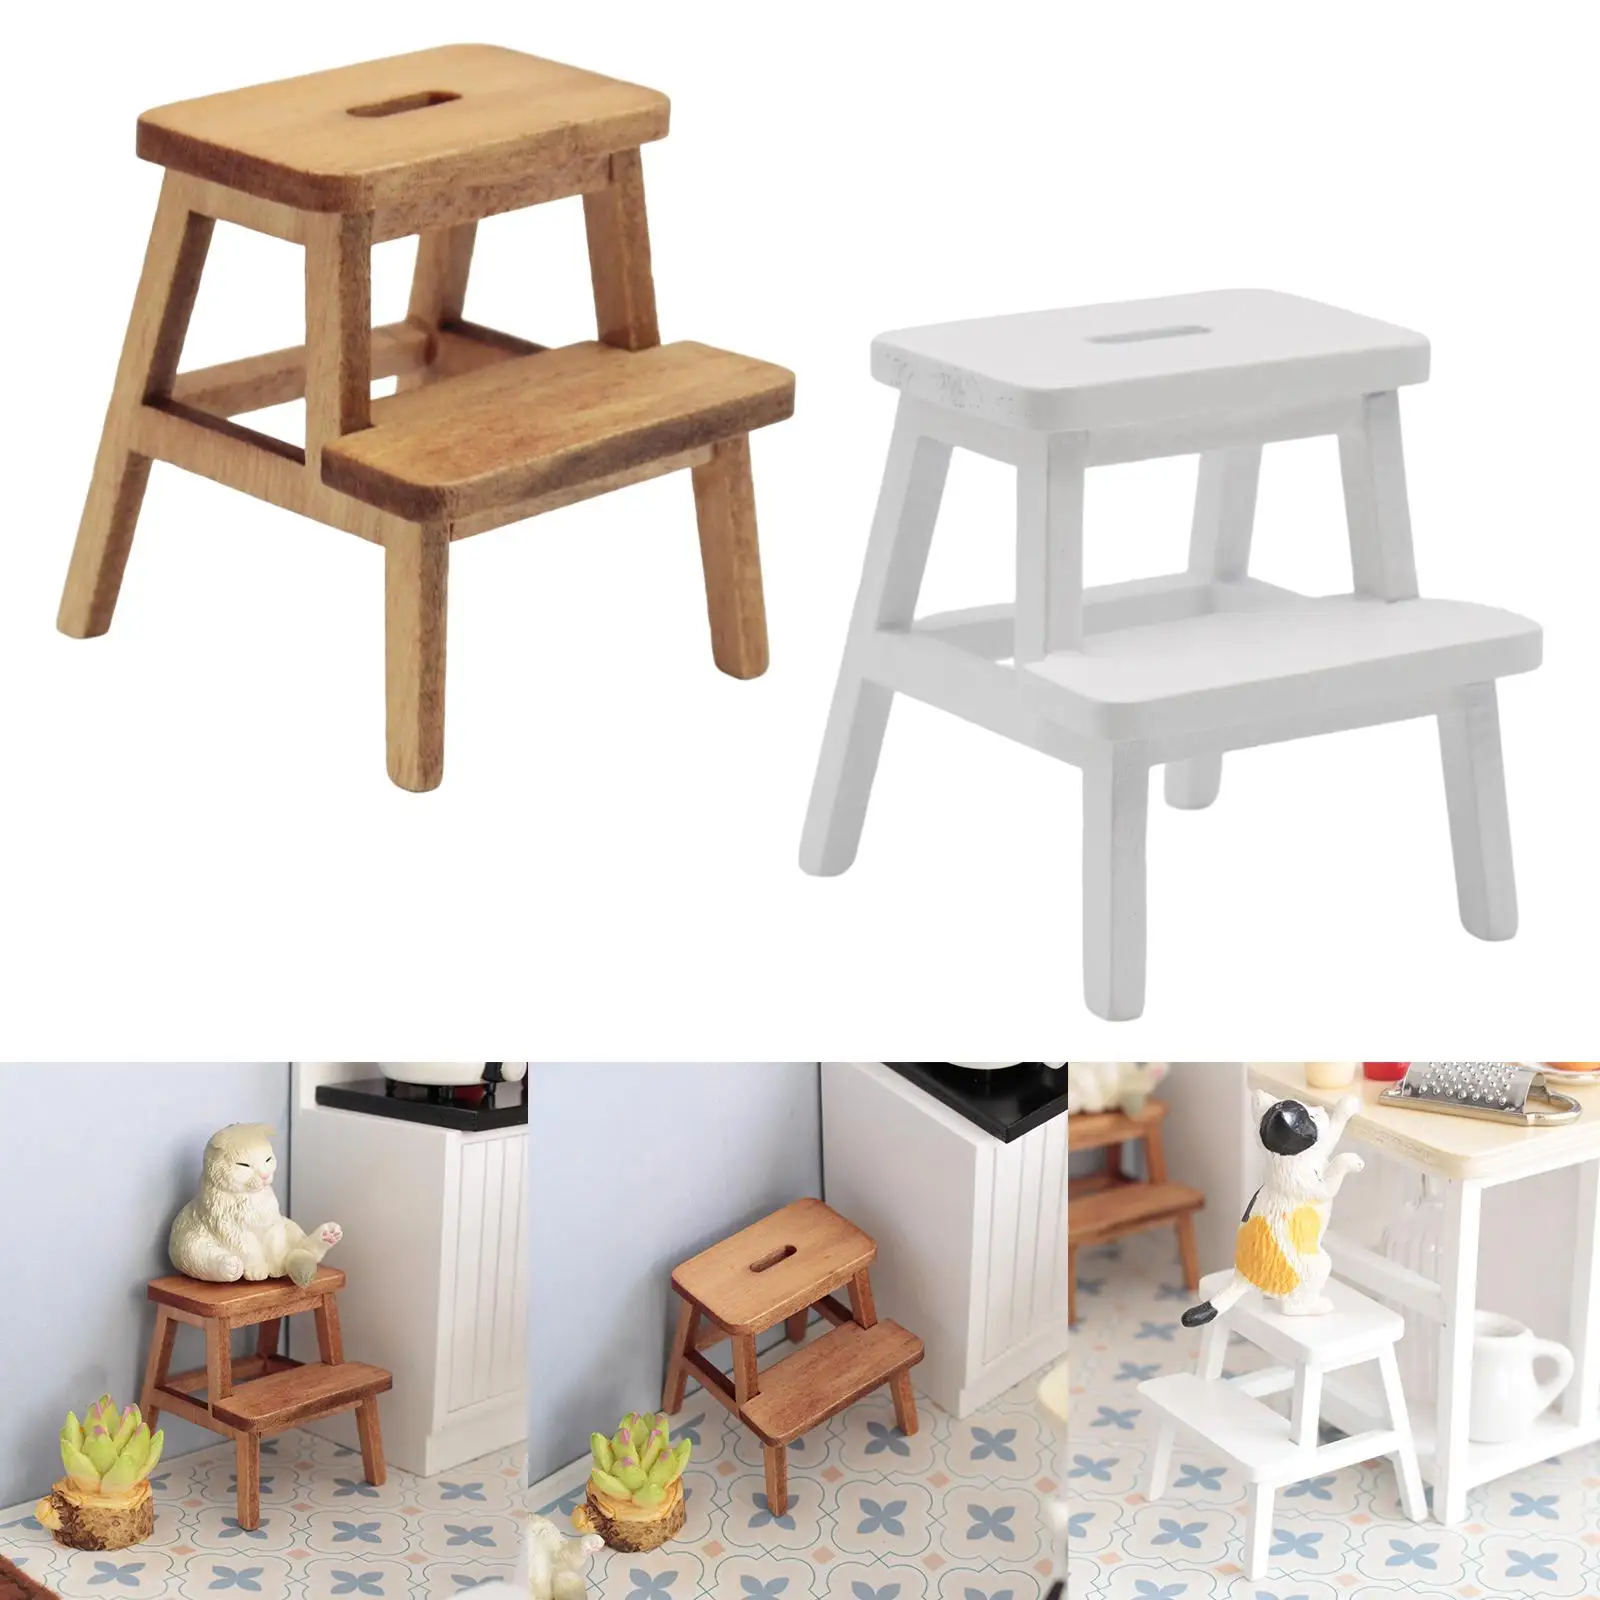 1/12 Doll House Chair Furniture Miniature Wooden for Pretend play Room